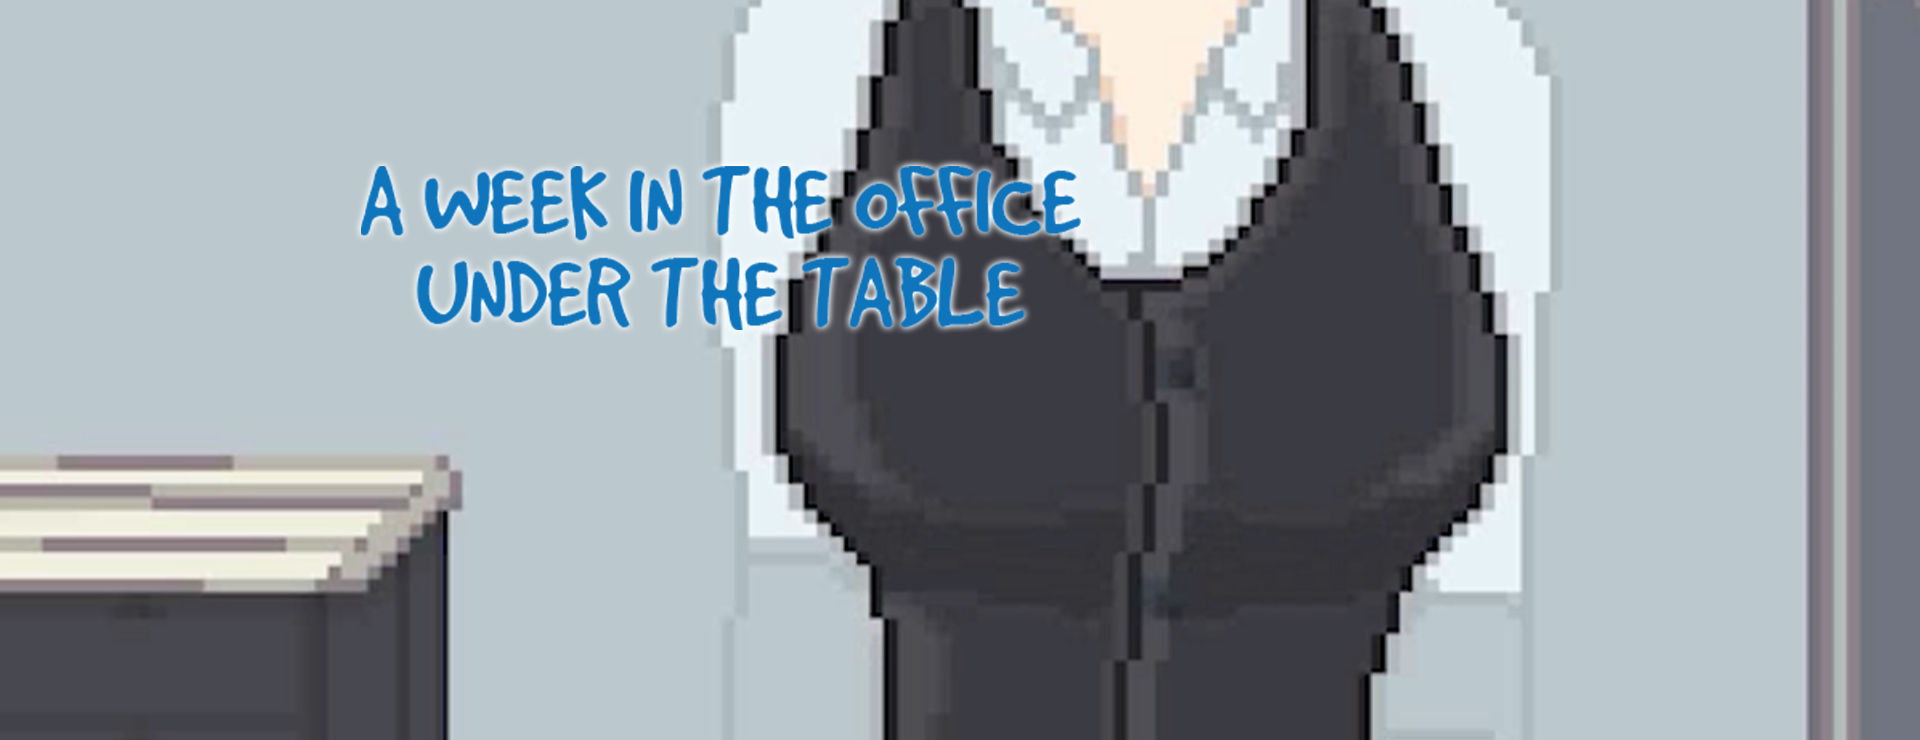 A Week in the Office -Under the Table- - Simulation Jeu